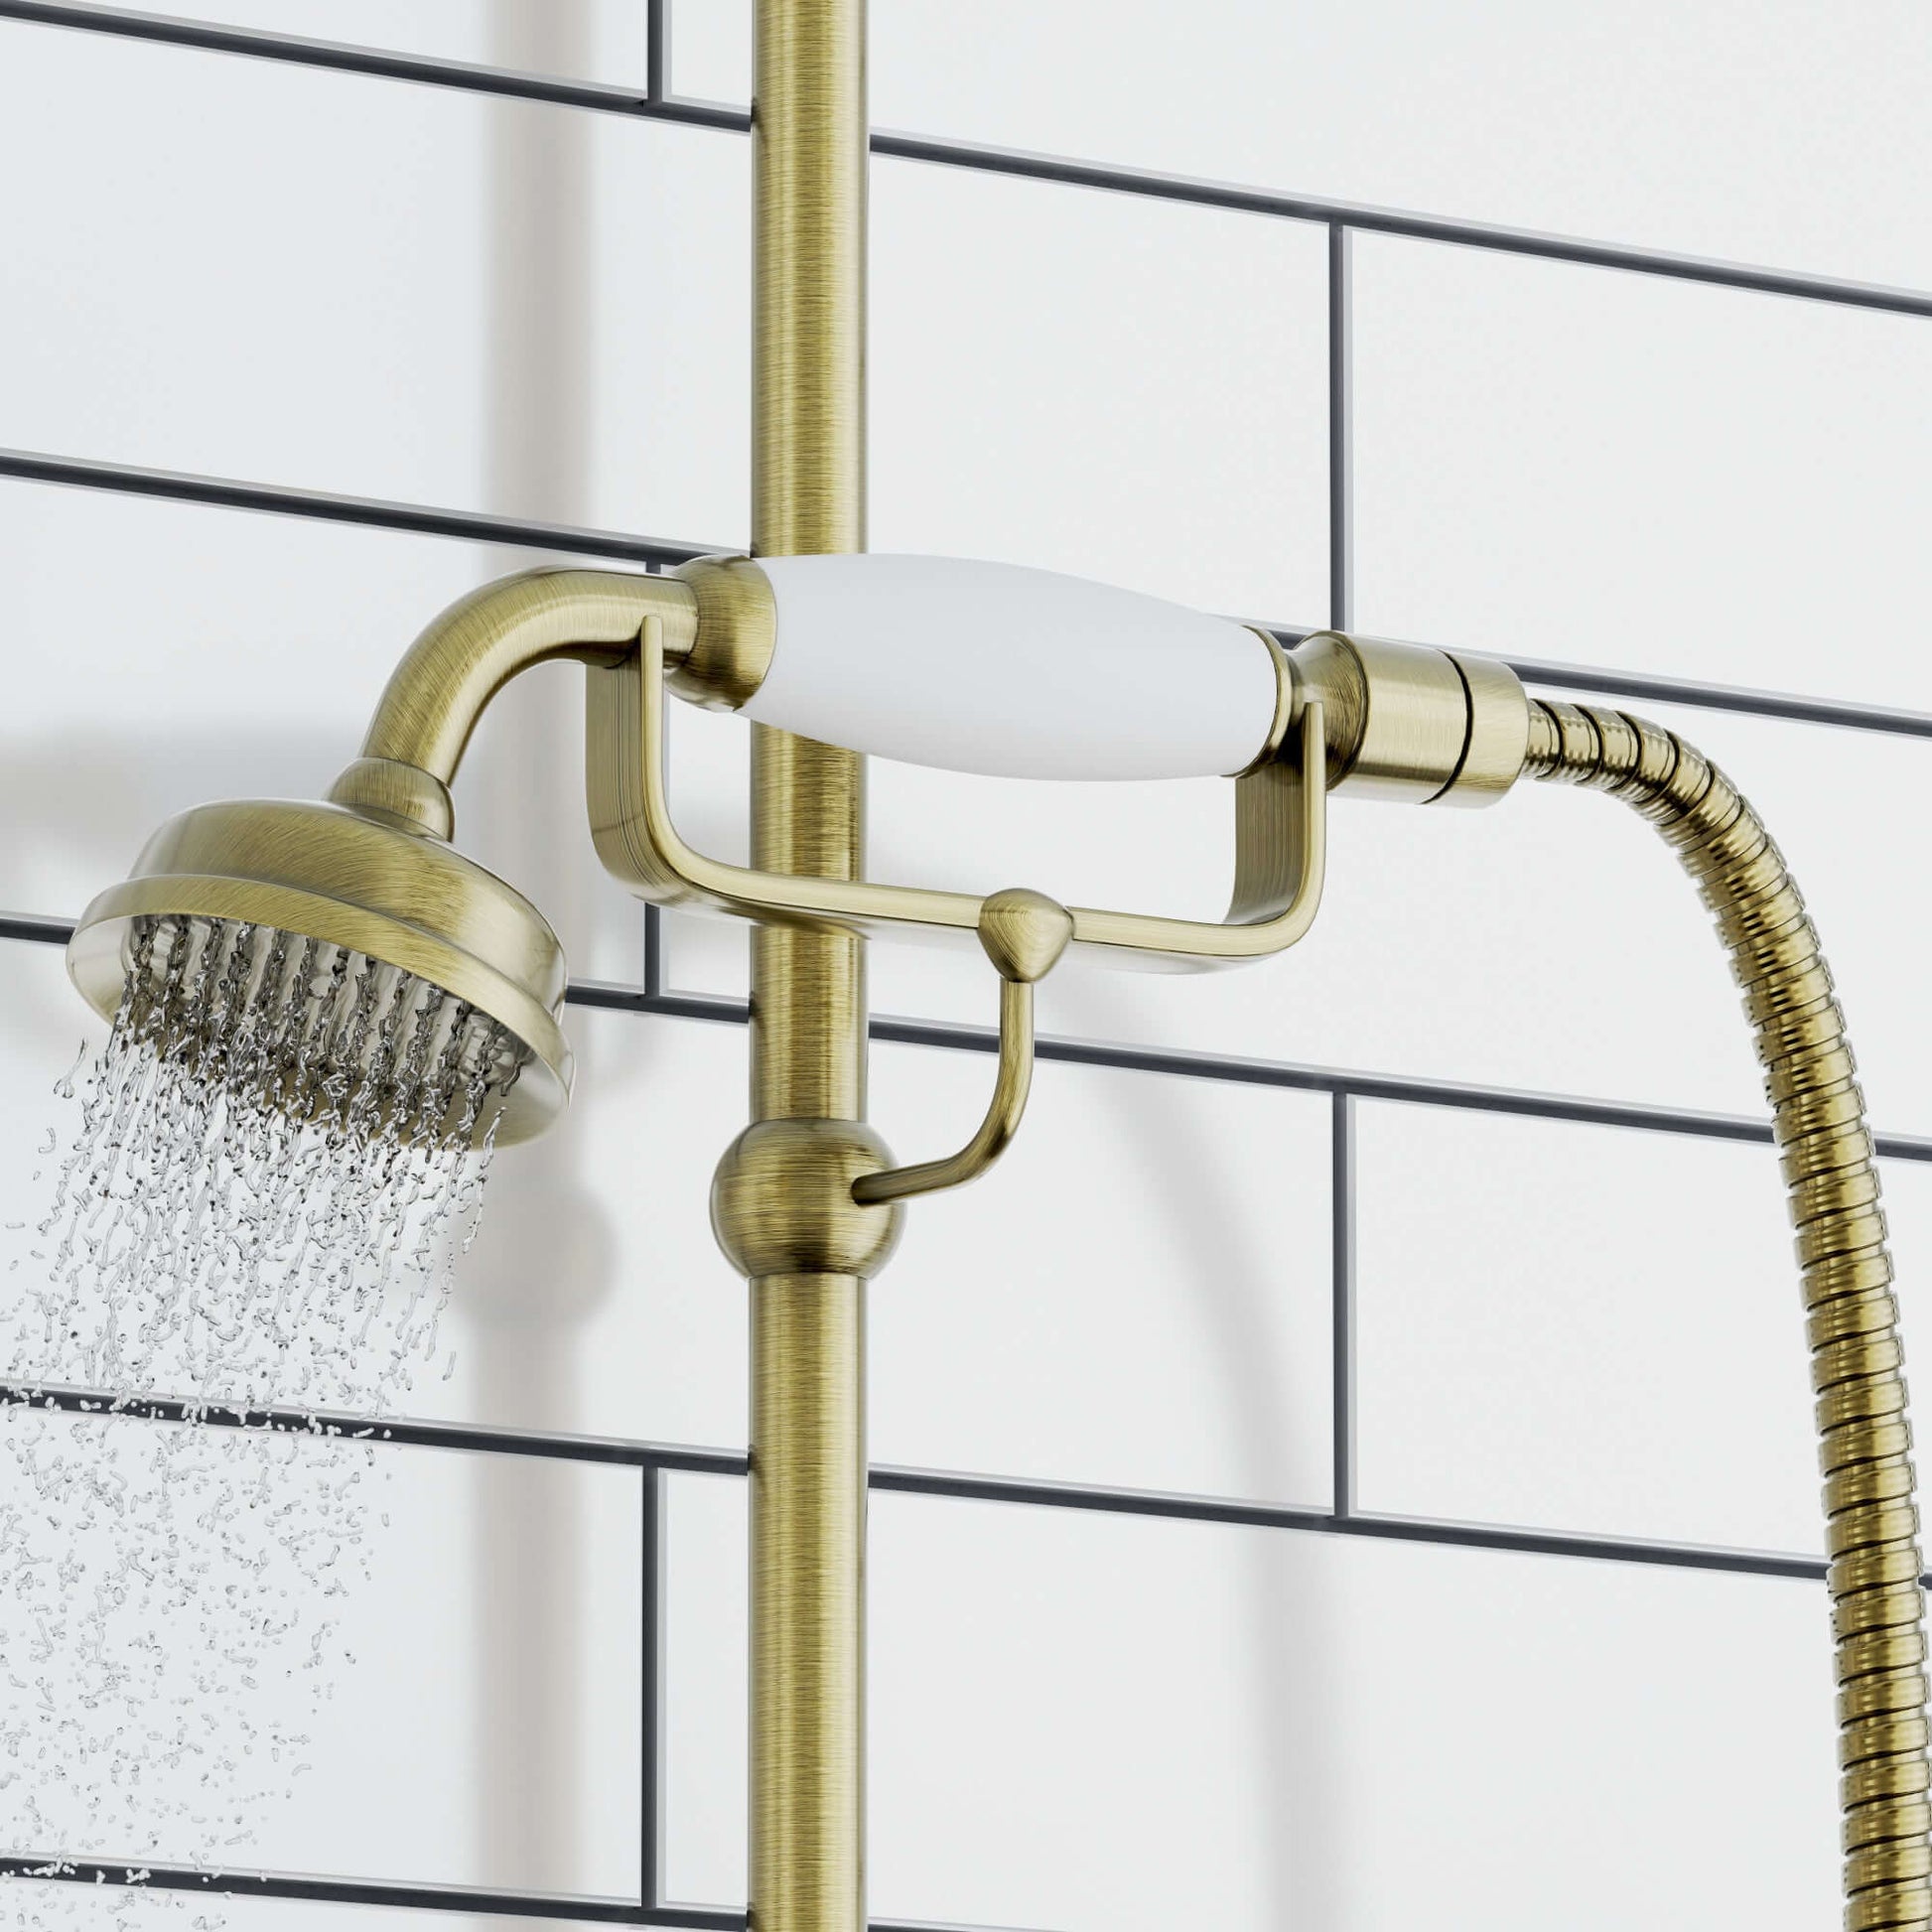 Downton Exposed Traditional Thermostatic Shower Set 2 Outlet Incl. Twin Shower Valve With Diverter, Rigid Riser Rail, 200mm Shower Head, Telephone Style Ceramic Handset & Caddy - Antique Bronze And White - Showers